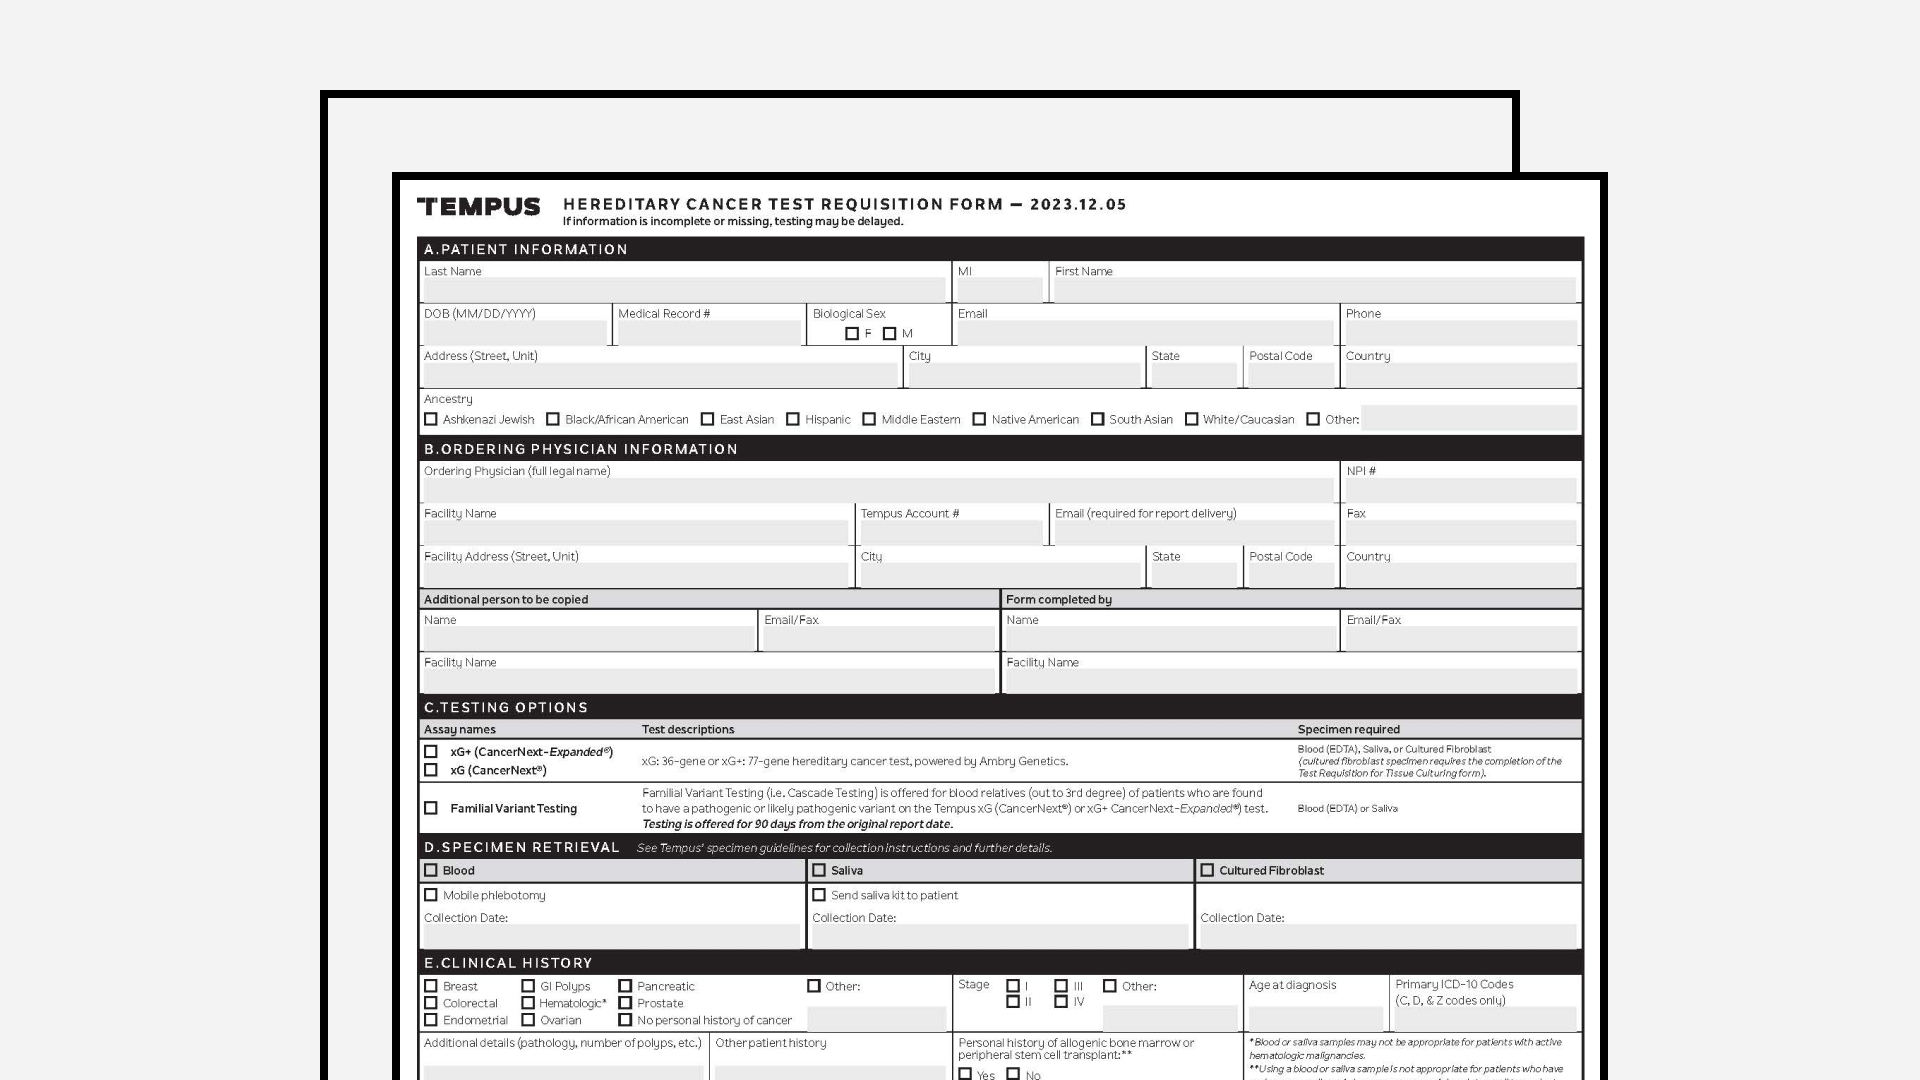 Hereditary Requisition Form (xG powered by Ambry Genetics®)